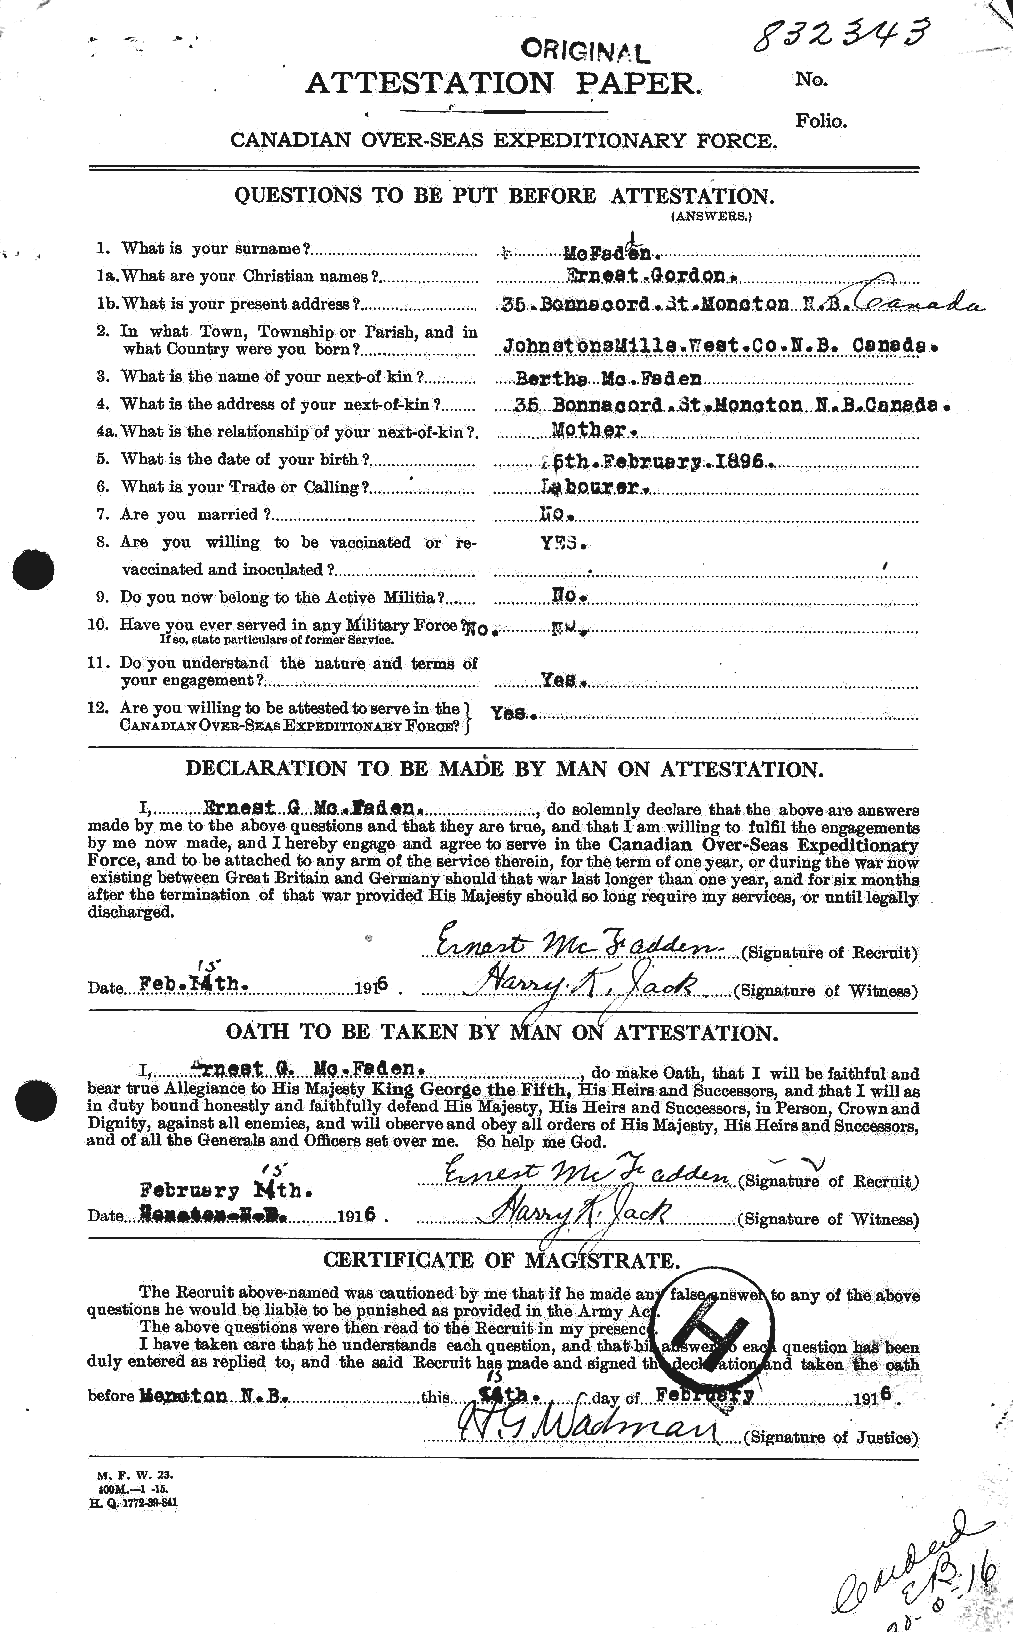 Personnel Records of the First World War - CEF 521046a